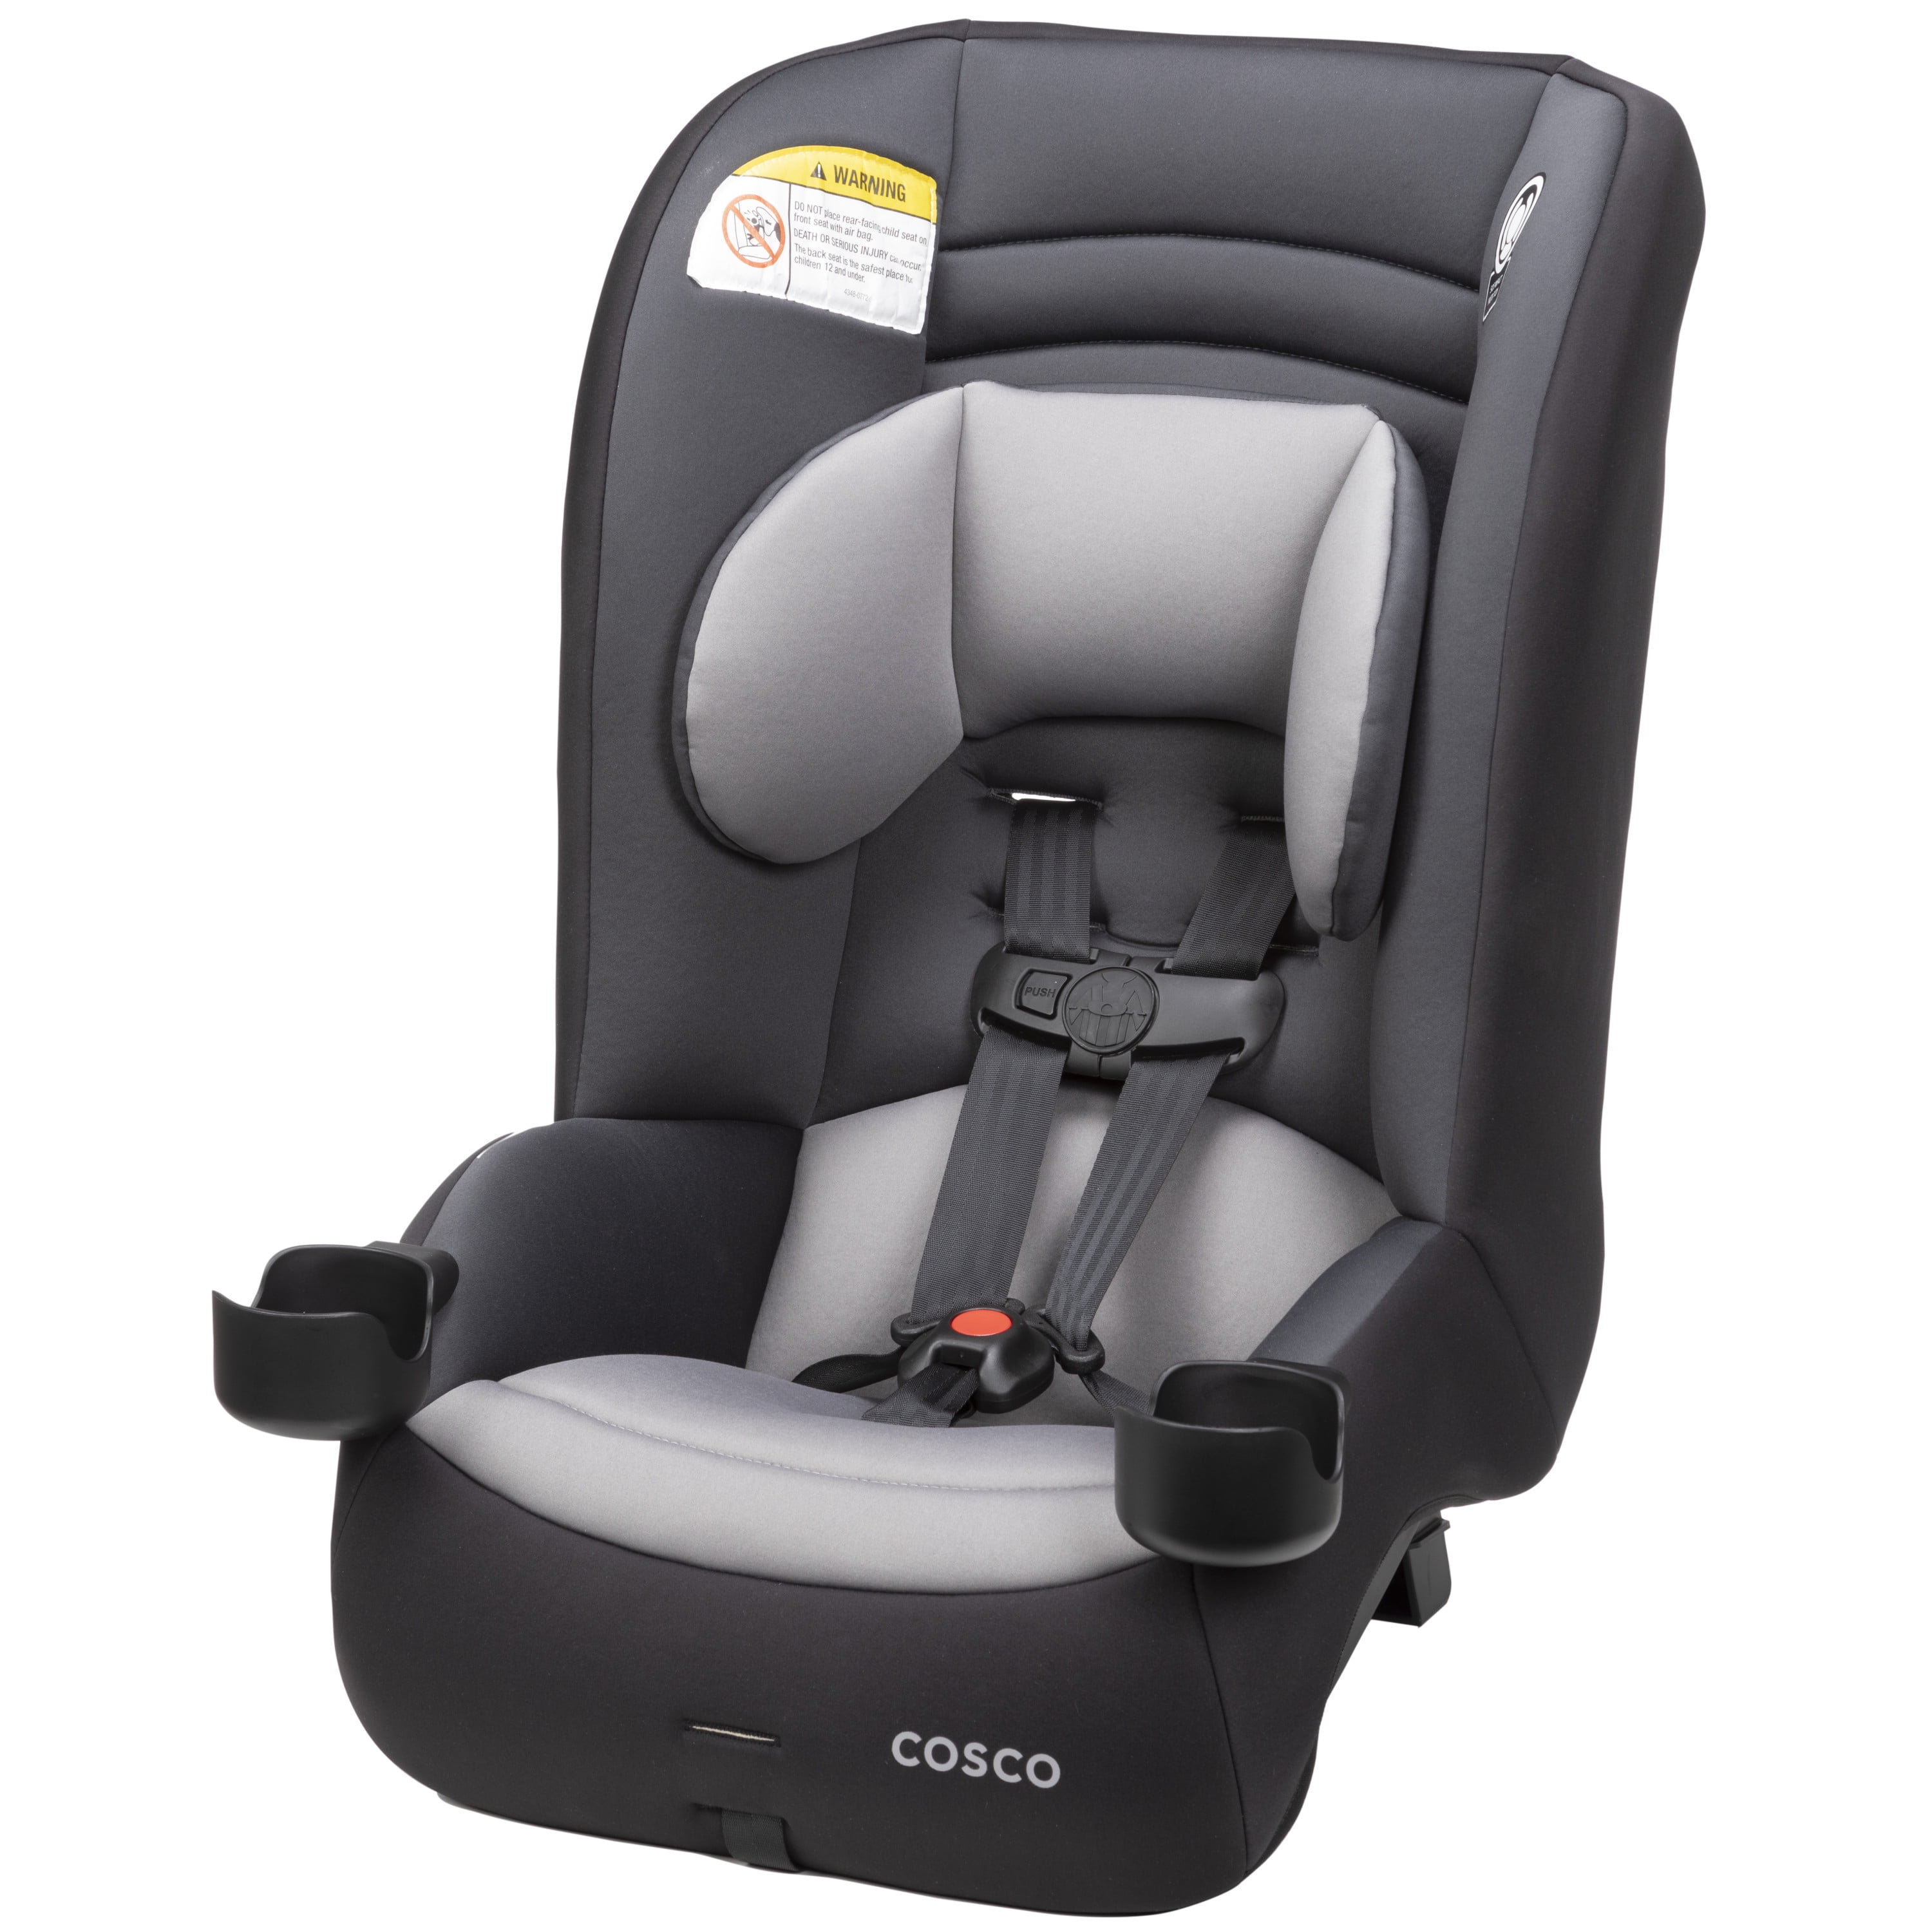 Heather Navy Cosco Mighty Fit 65 DX Convertible Car Seat 